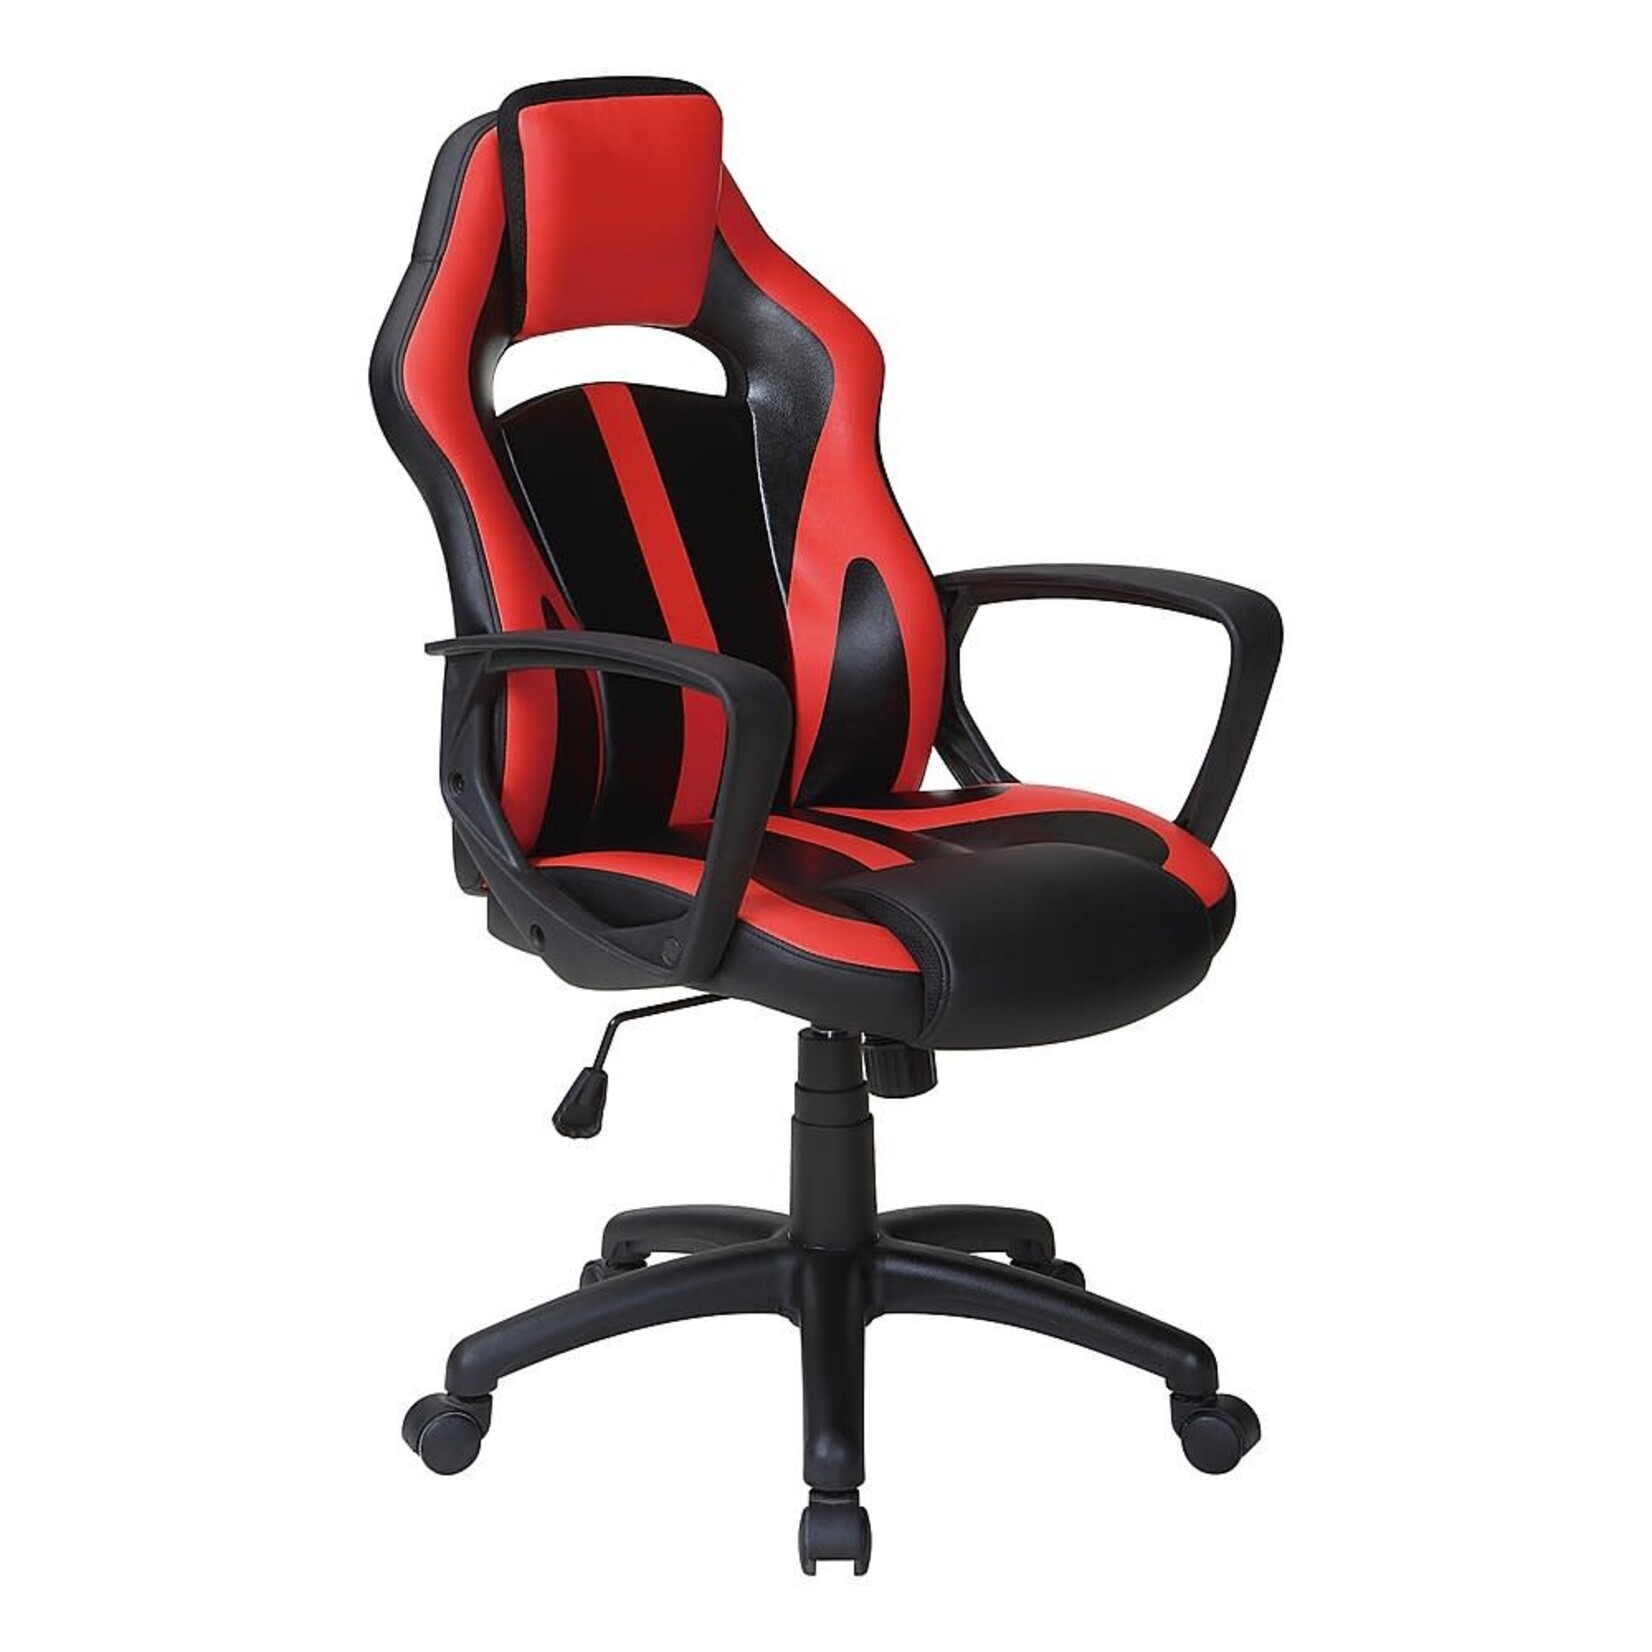 Designlab OSP Home Furnishings - Influx Gaming Chair - Red